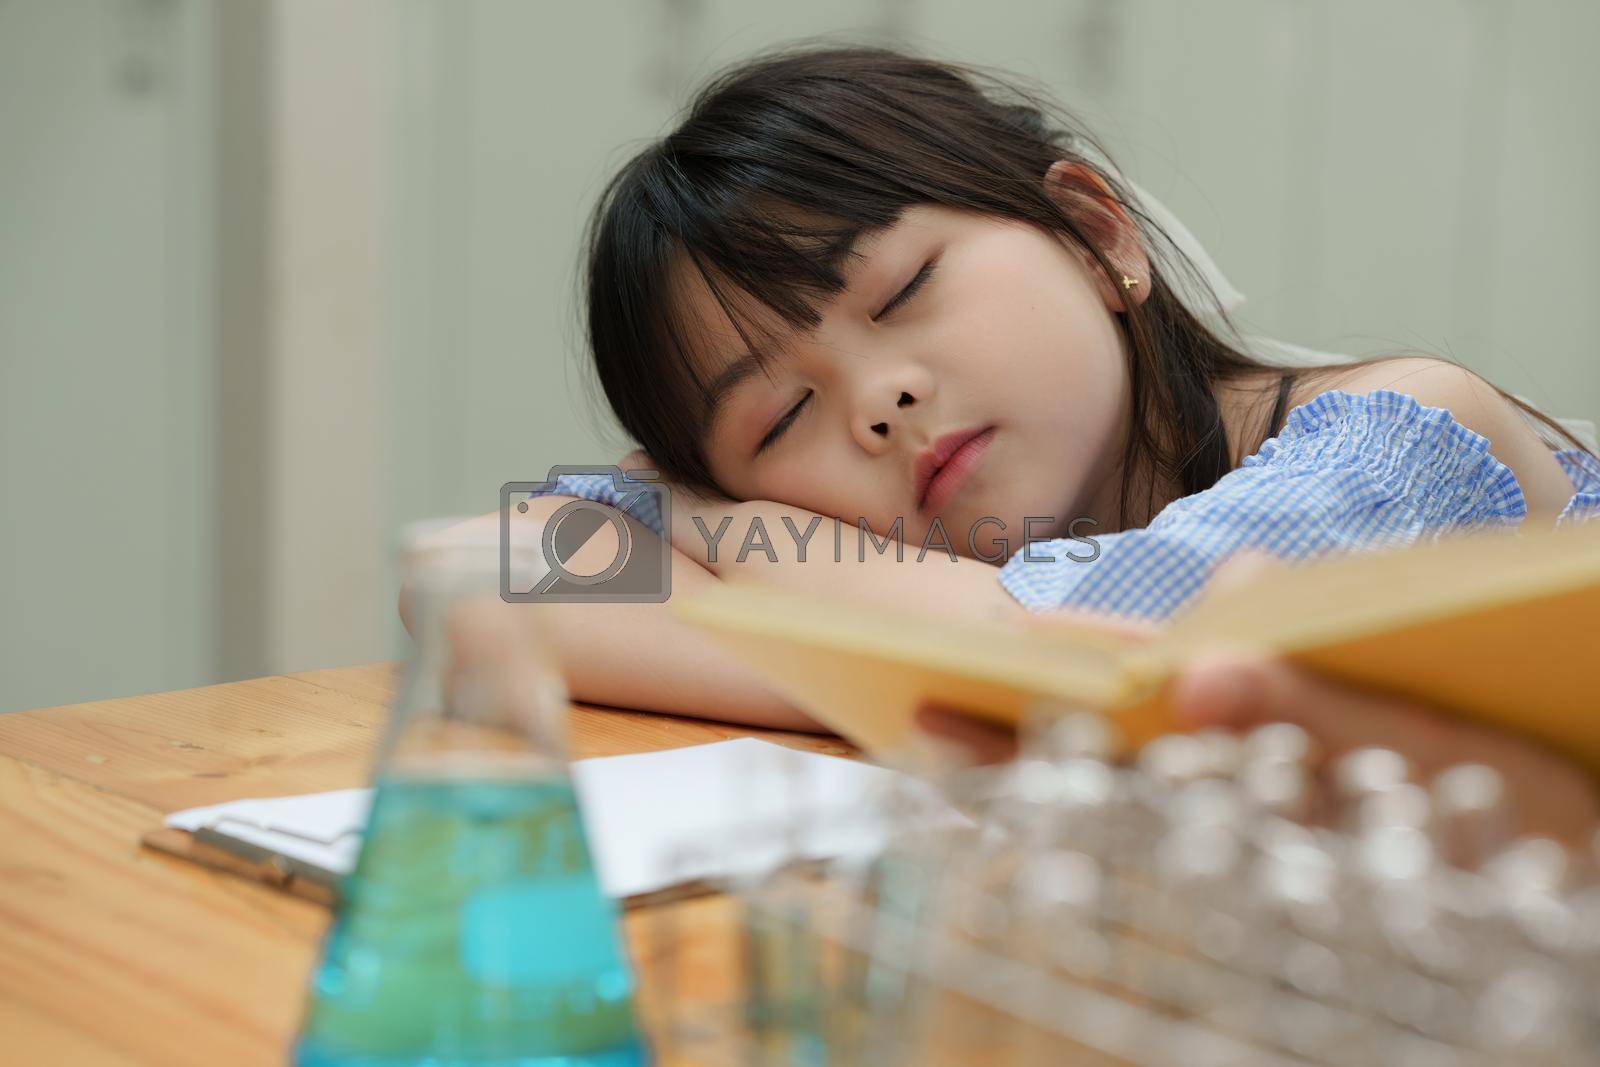 Royalty free image of Kid sleeping while doing science experiments. Education science concept by itchaznong